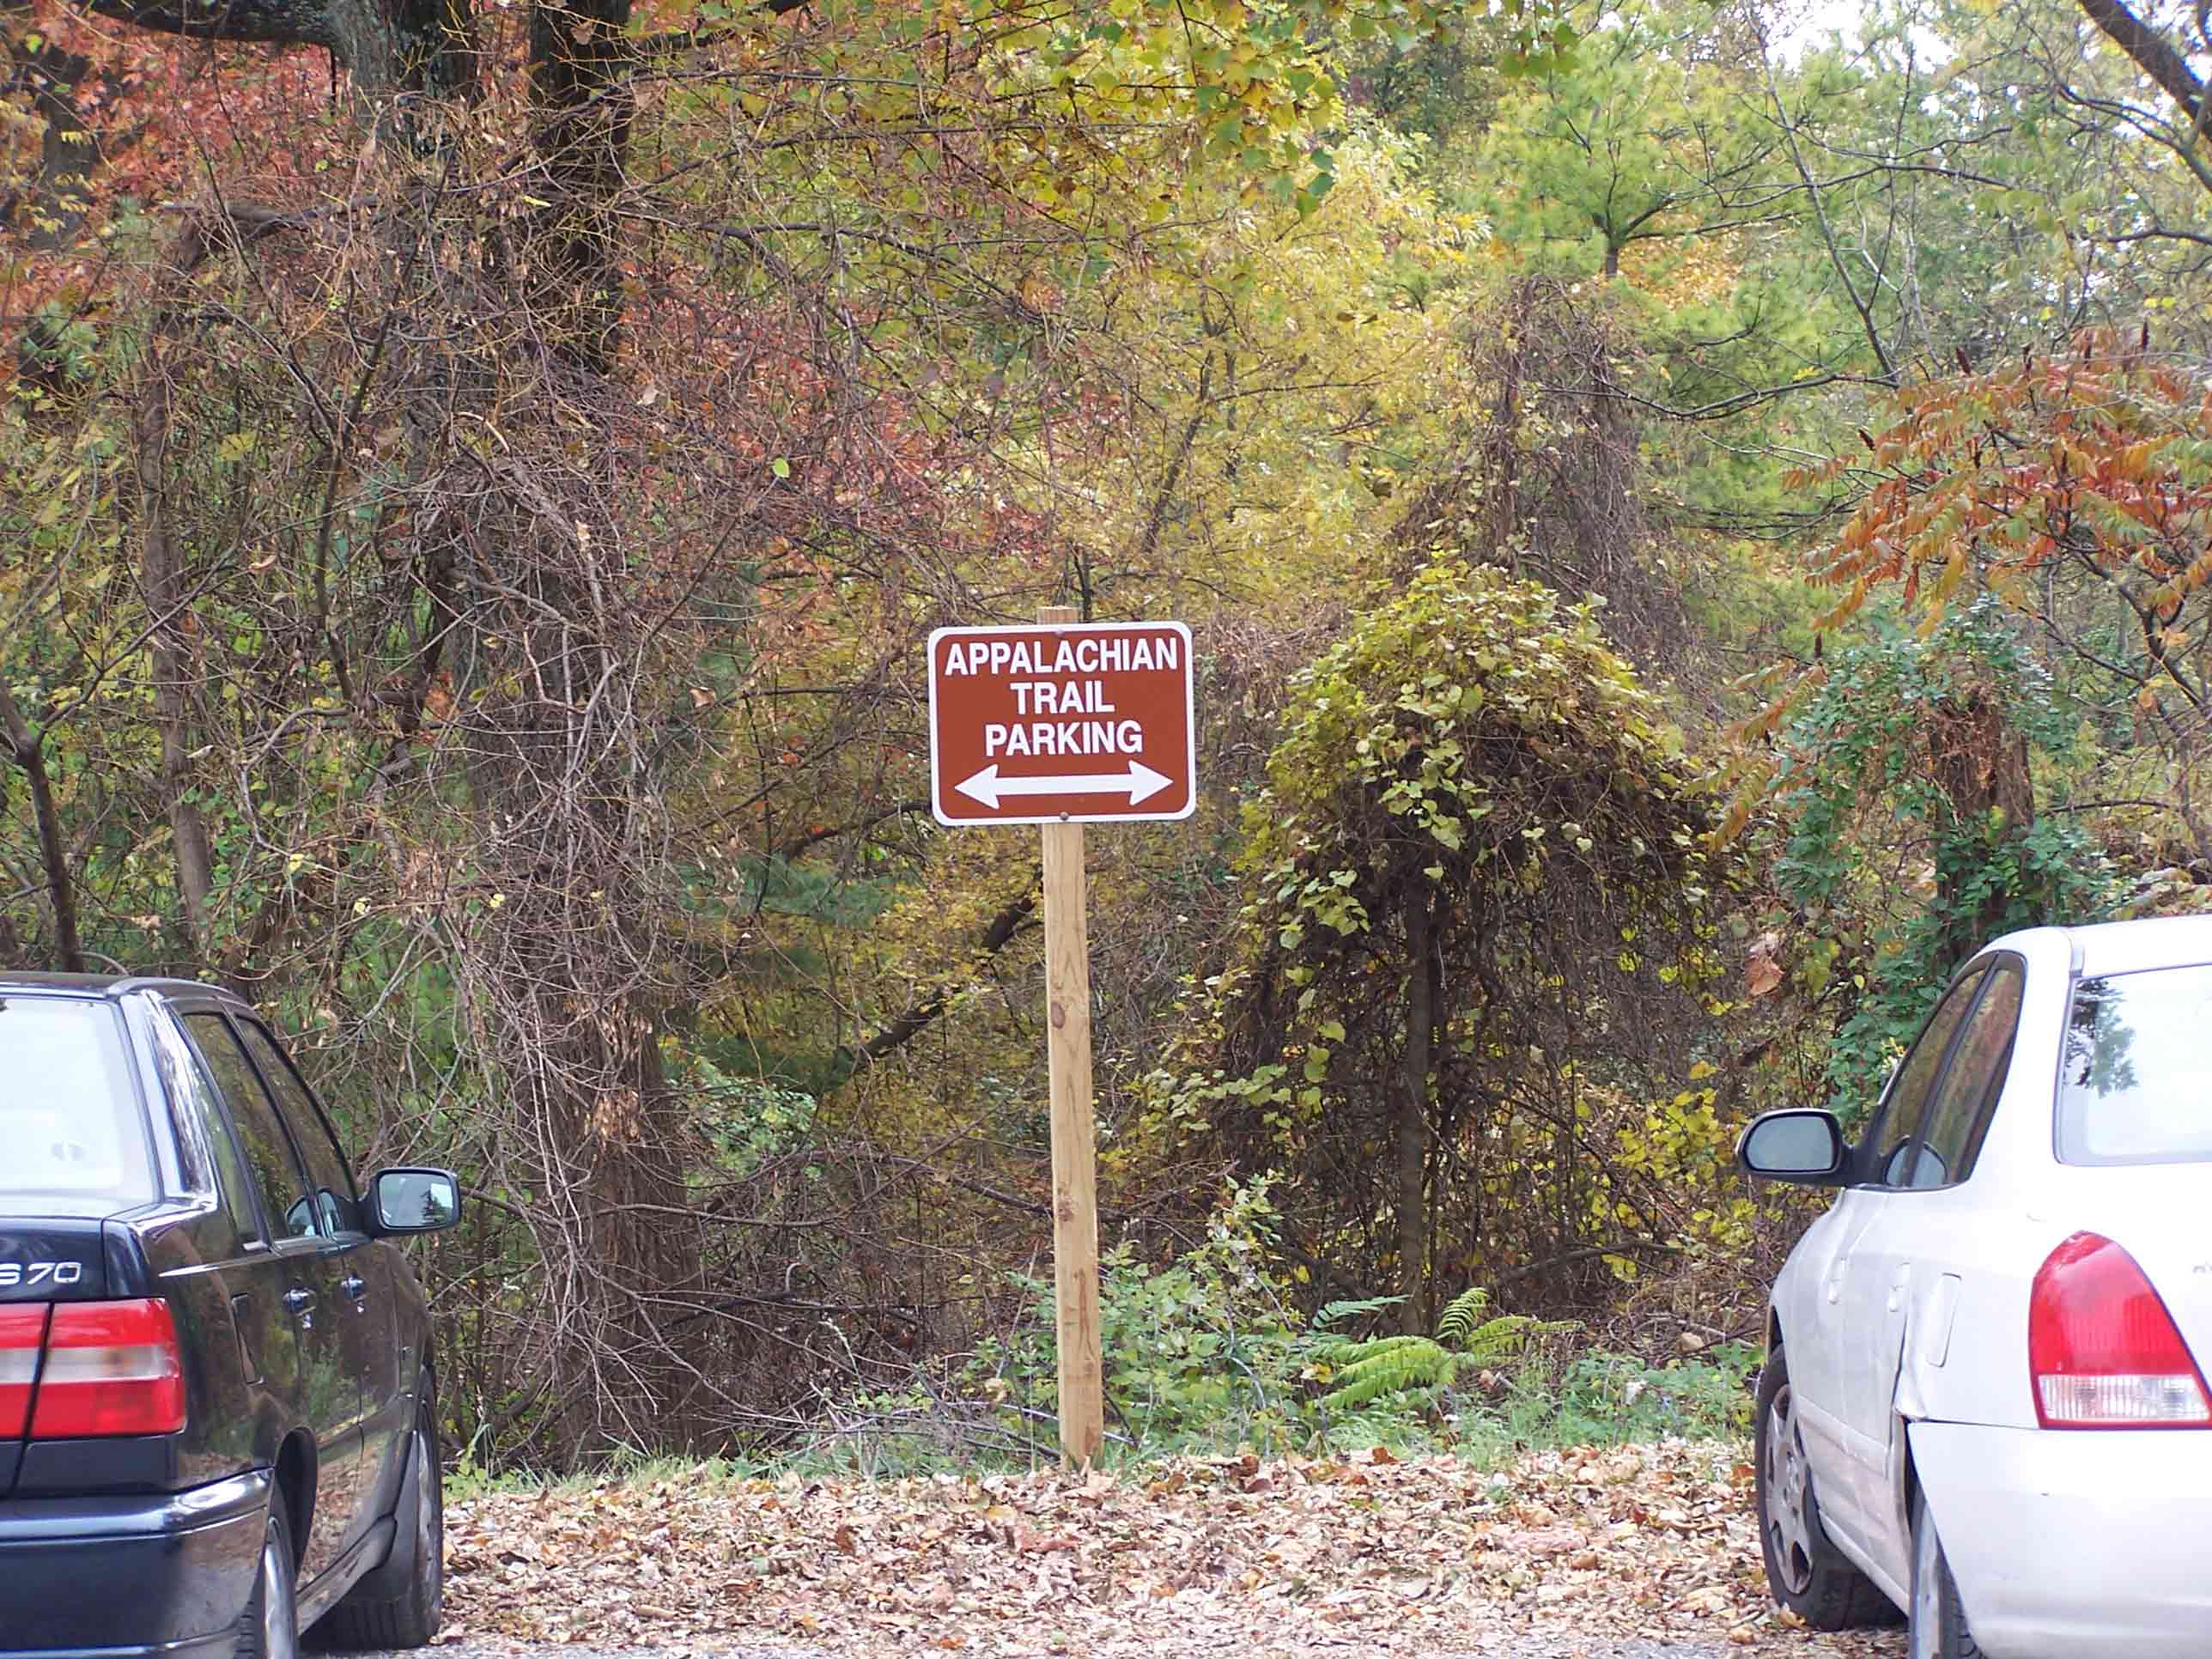 mm 4.9 - Parking at Old South Mt. Inn. Courtesy at@rohland.org